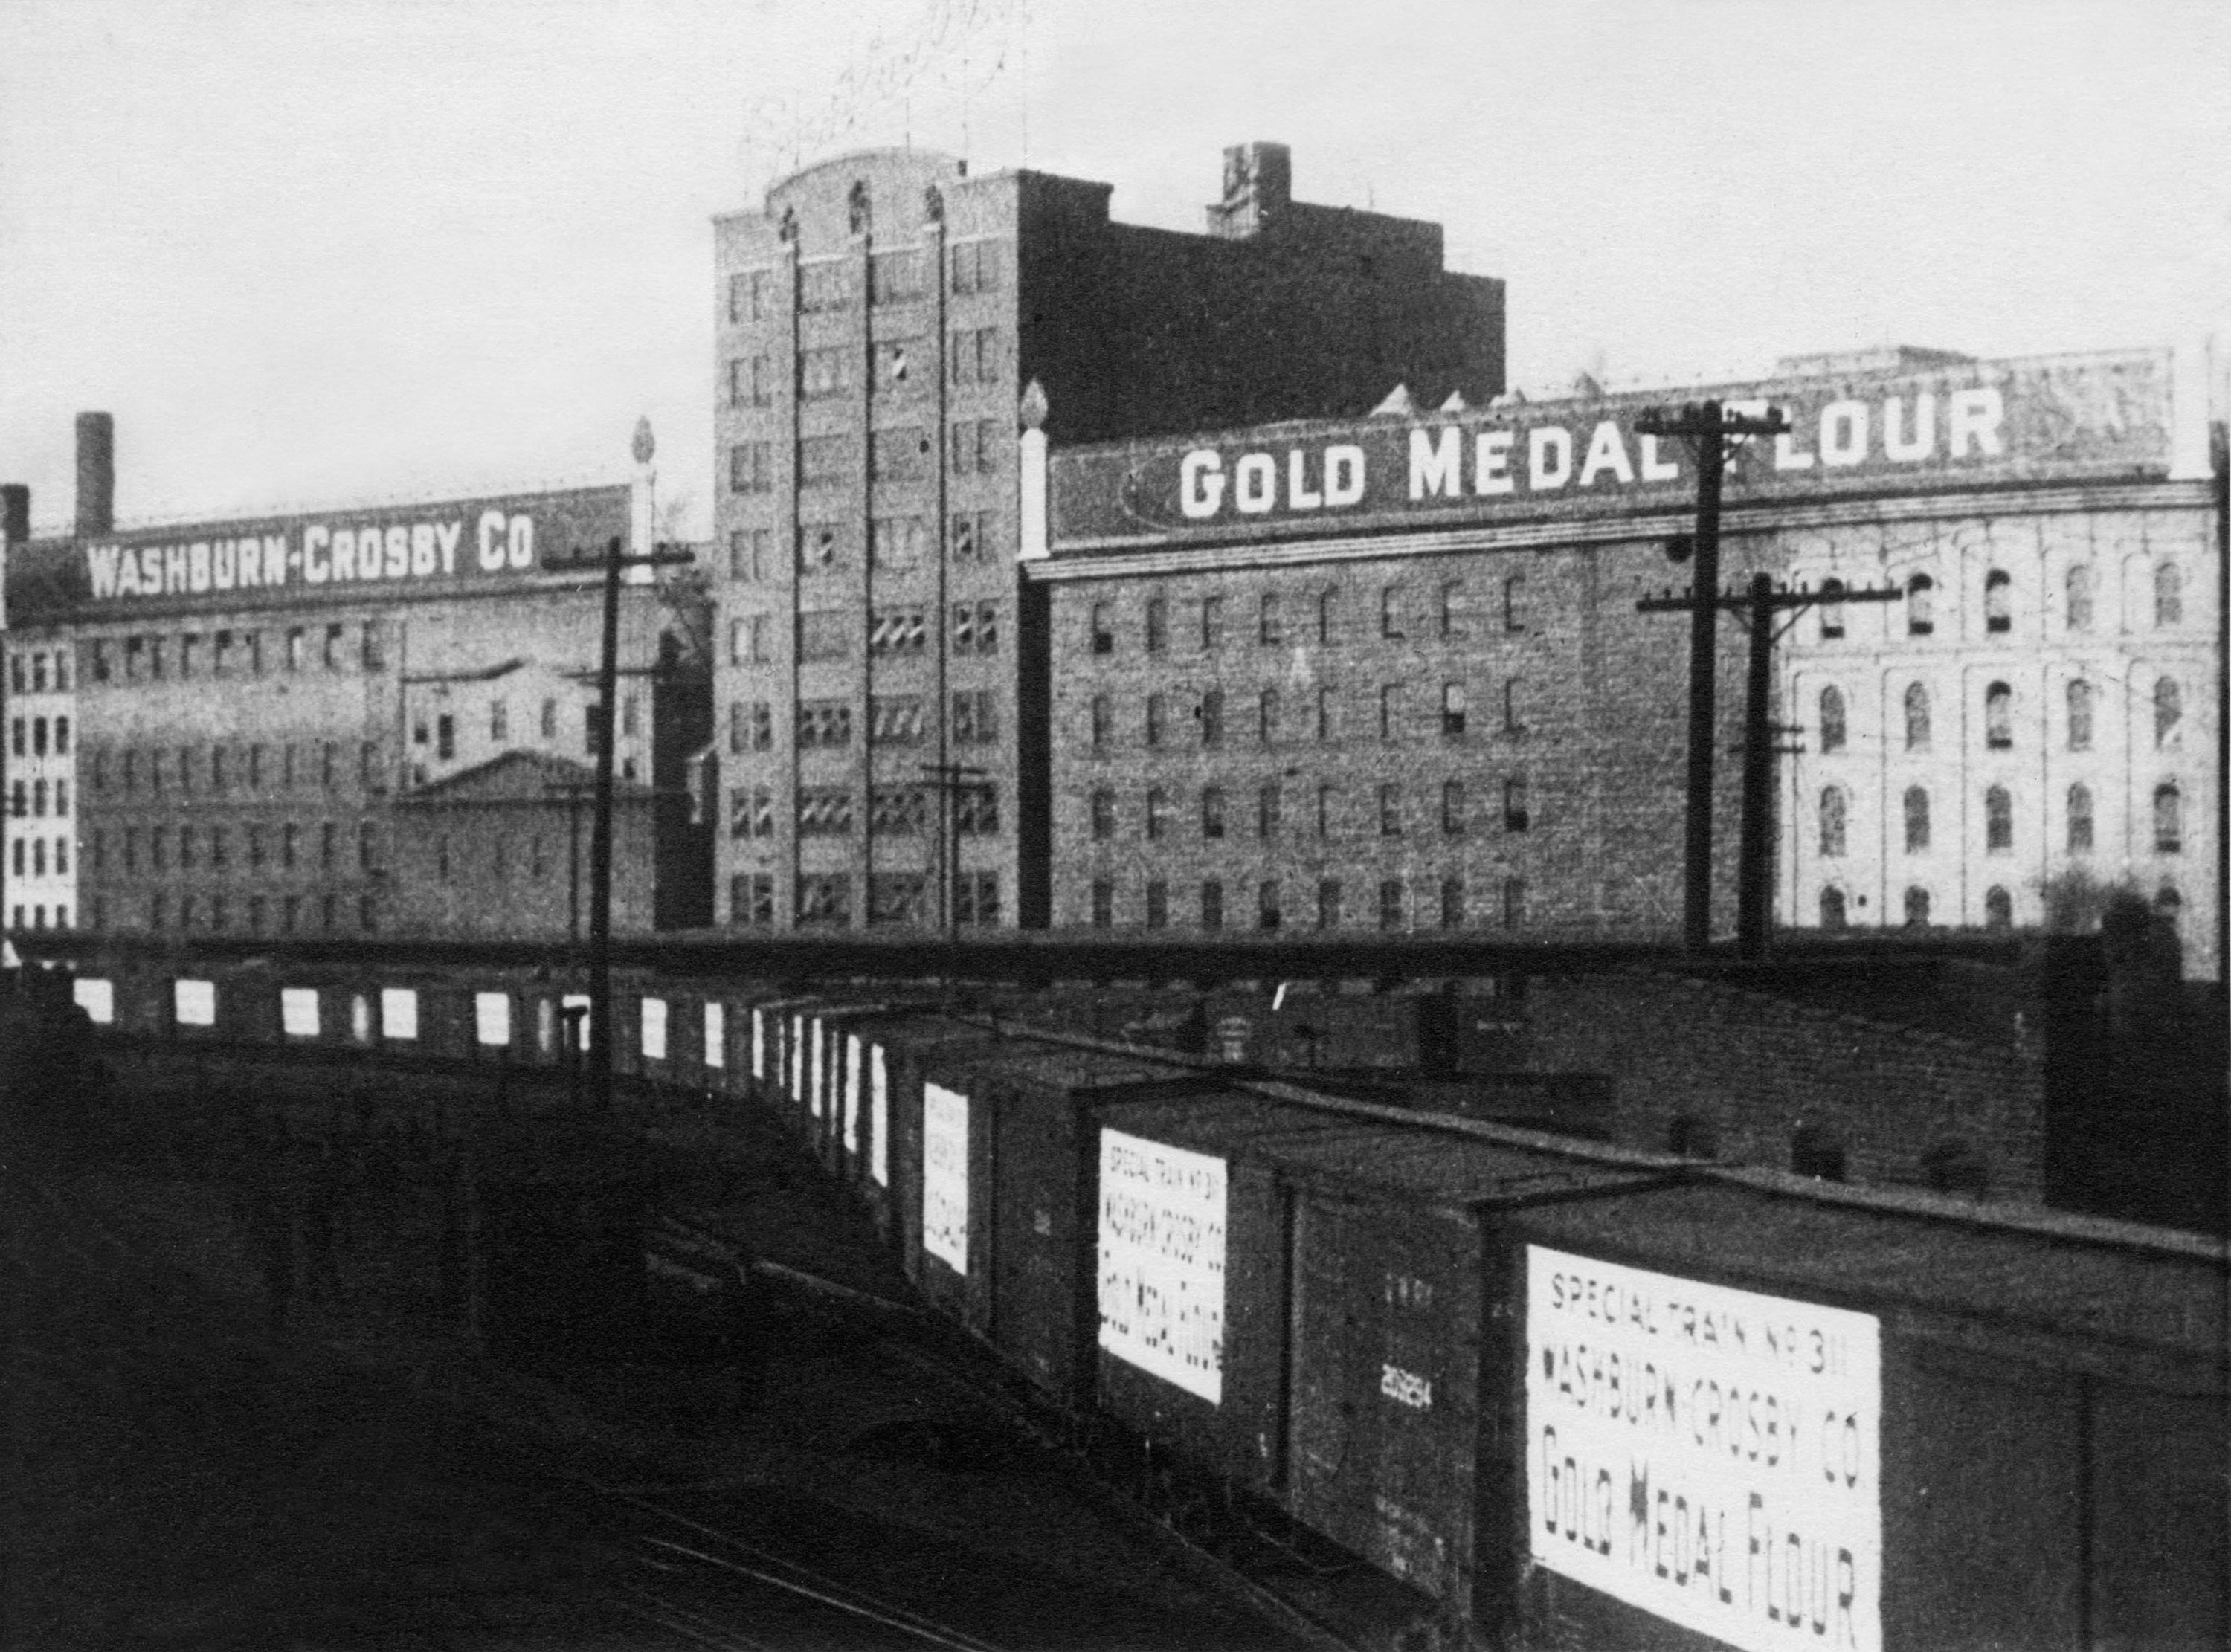 General Mills Mill with Gold Medal Flour sign